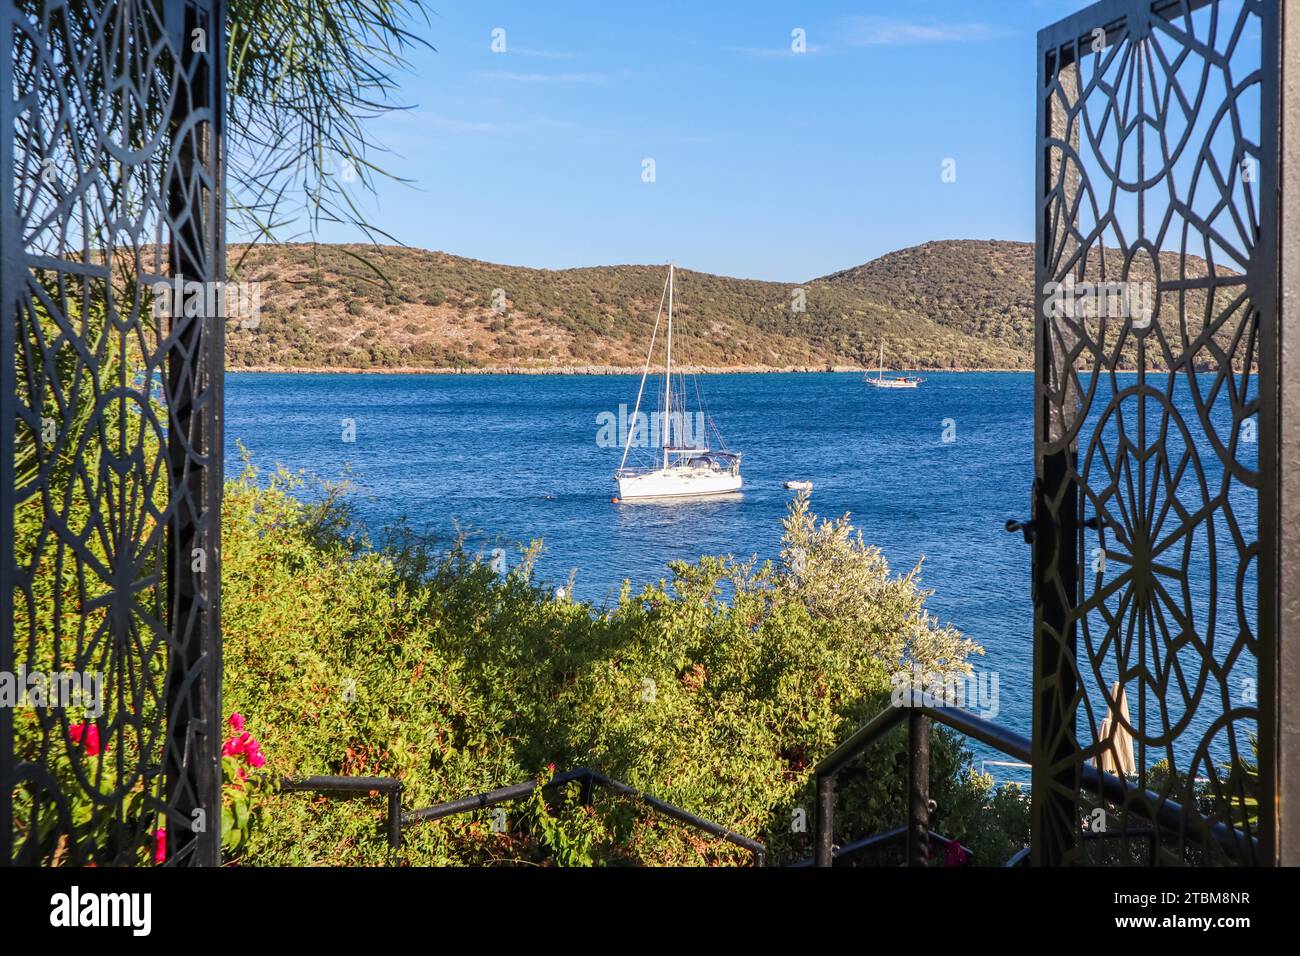 Beautiful Mediterranean coast with islands, mountains and yachts in the blue sea Stock Photo